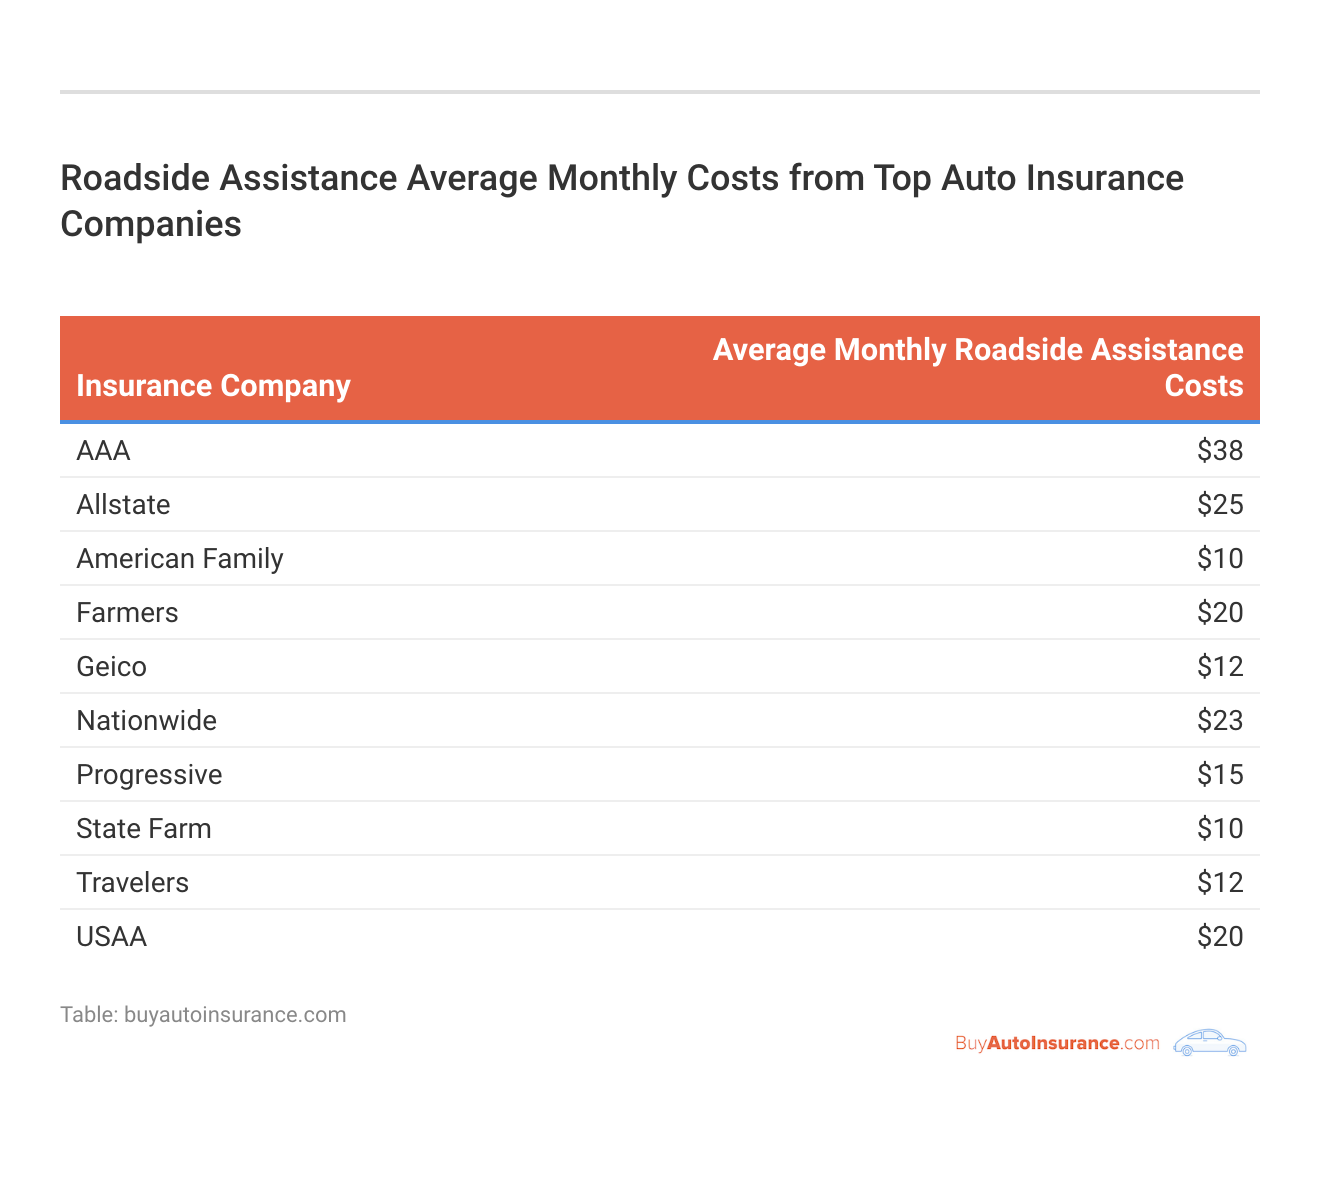 <h3>Roadside Assistance Average Monthly Costs from Top Auto Insurance Companies</h3>